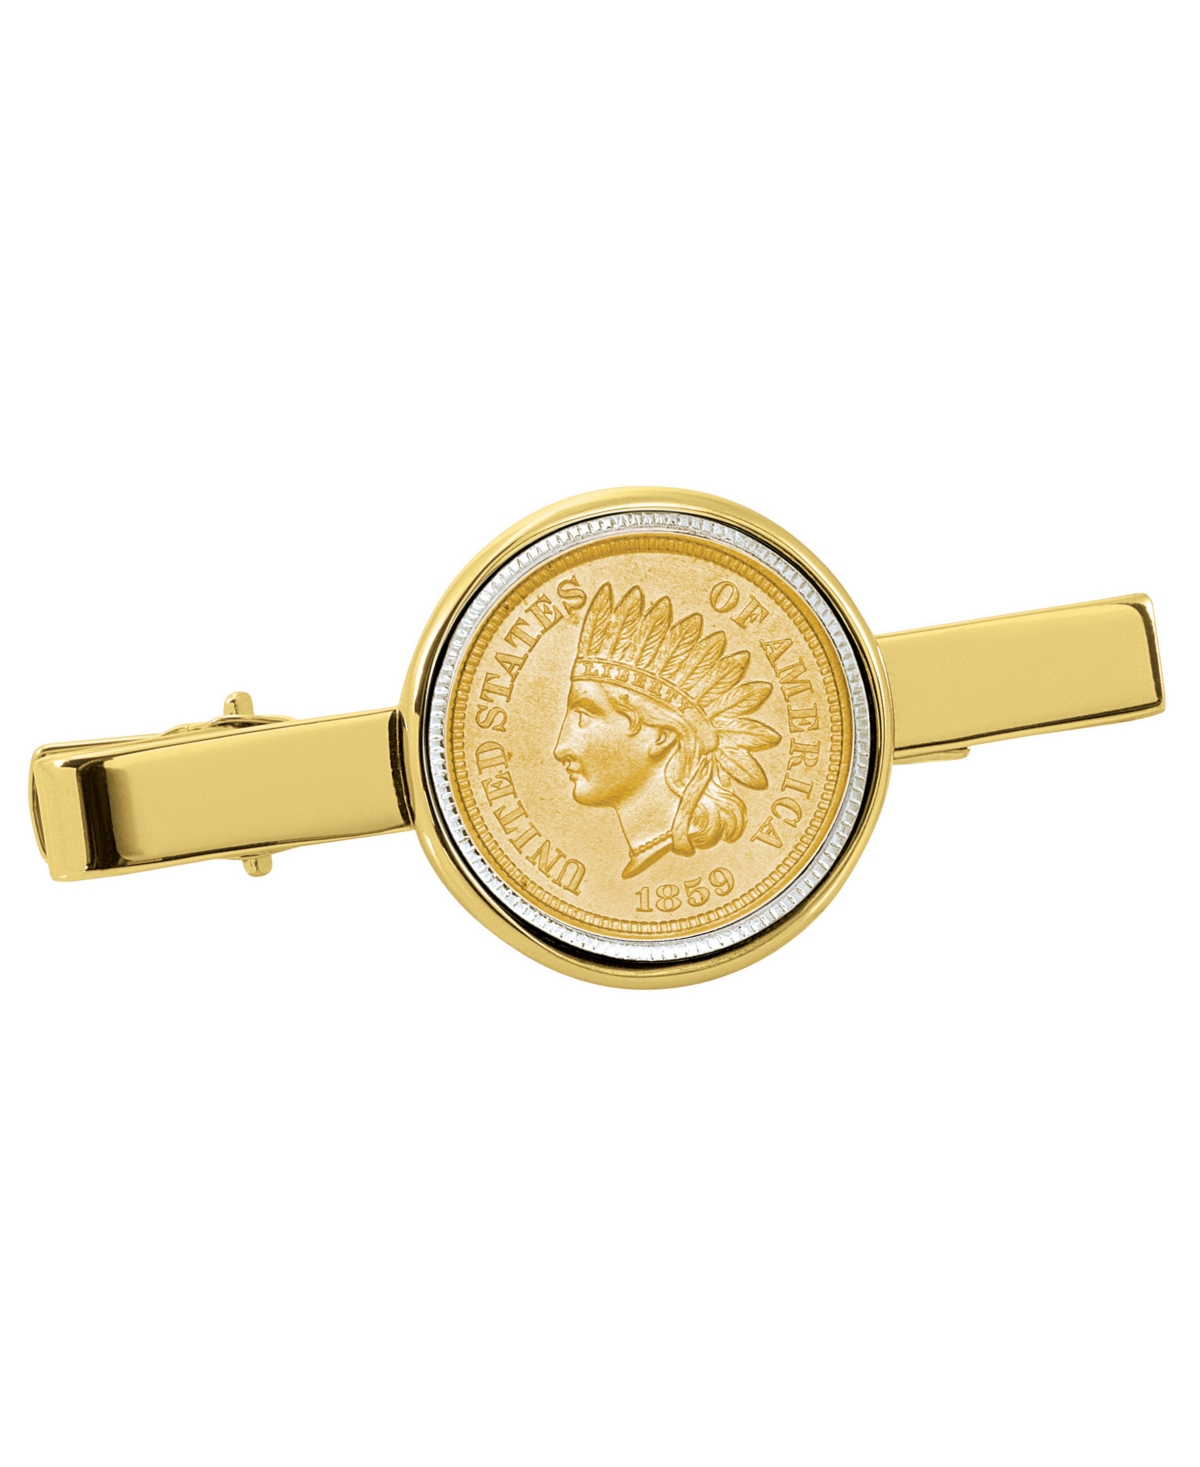 Gold-Layered 1800's Indian Penny Coin Tie Clip - Gold